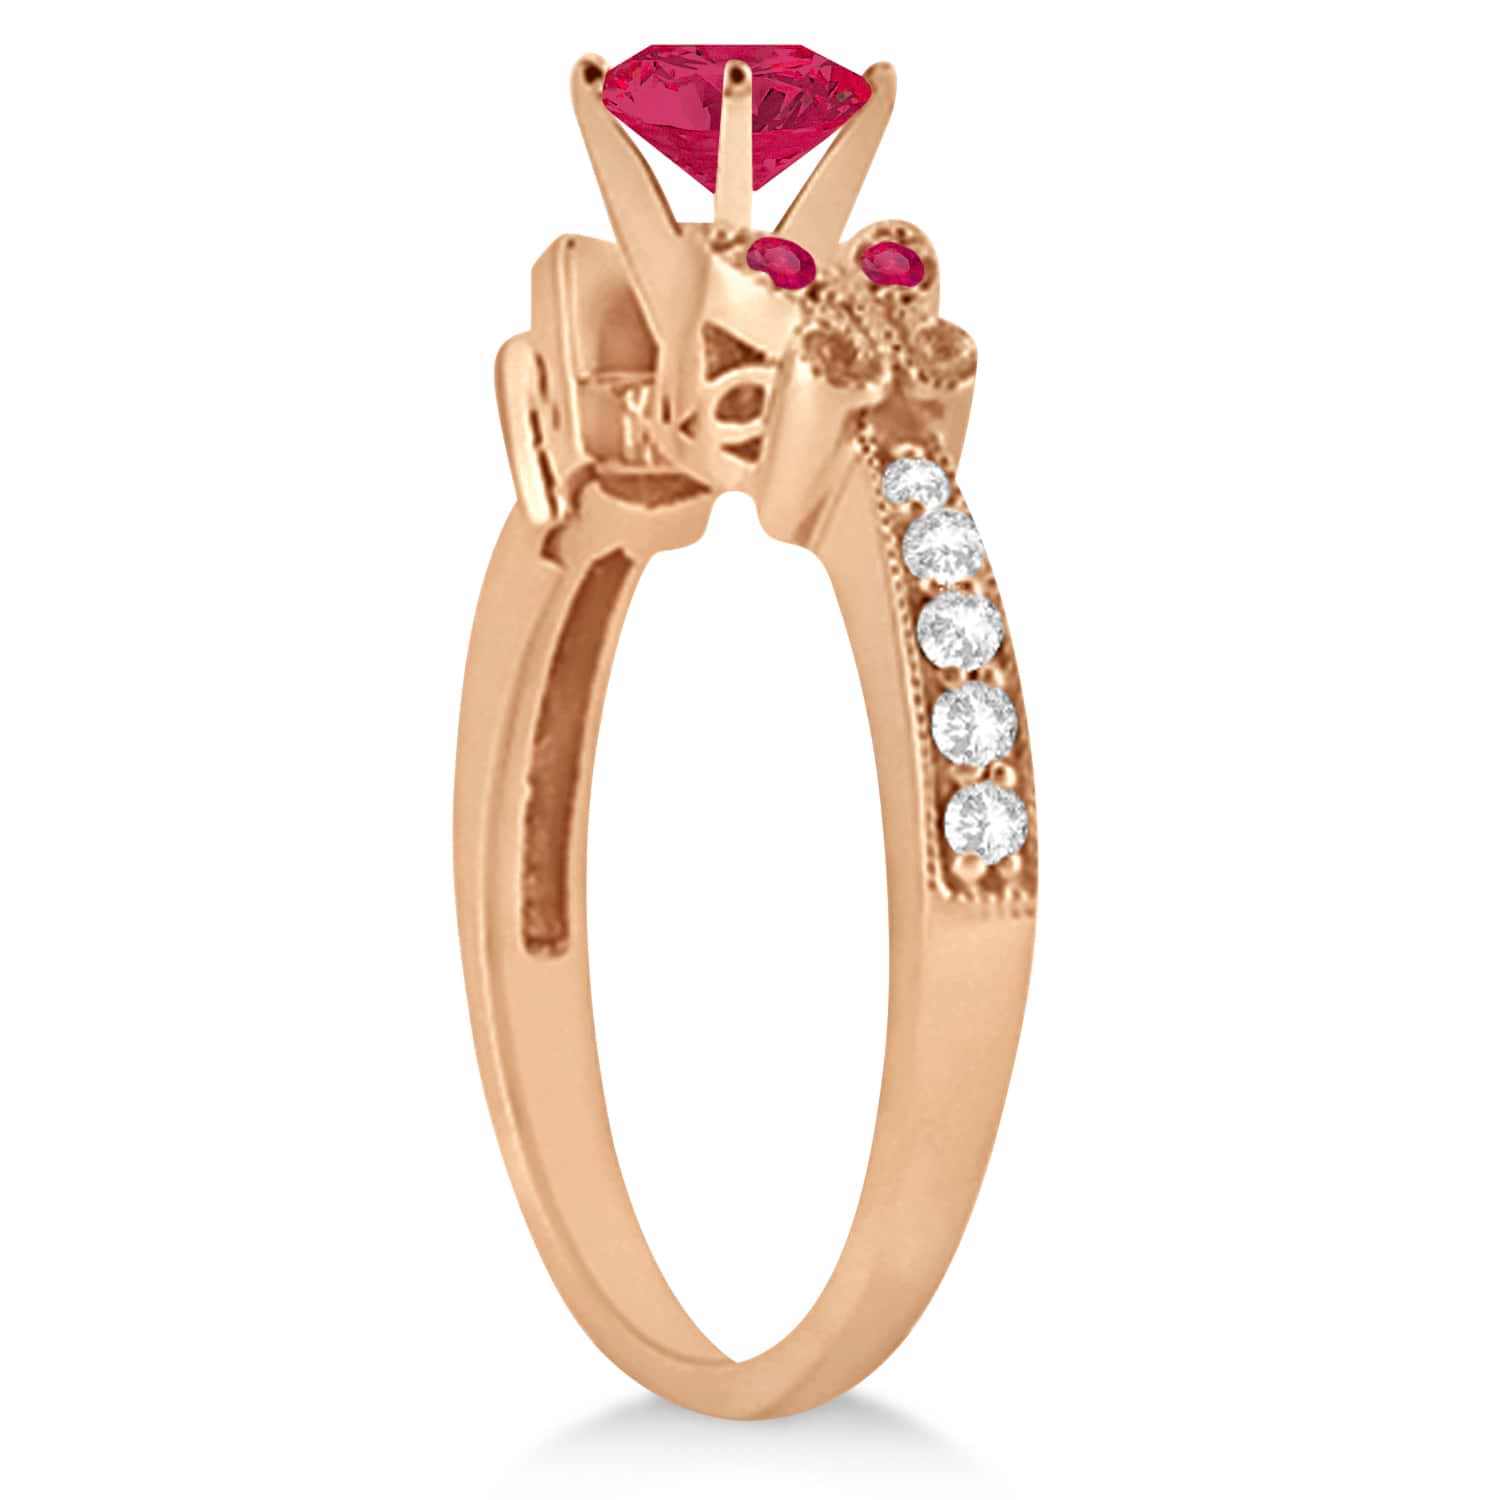 Butterfly Genuine Ruby & Diamond Engagement Ring 18K Rose Gold 1.26ct